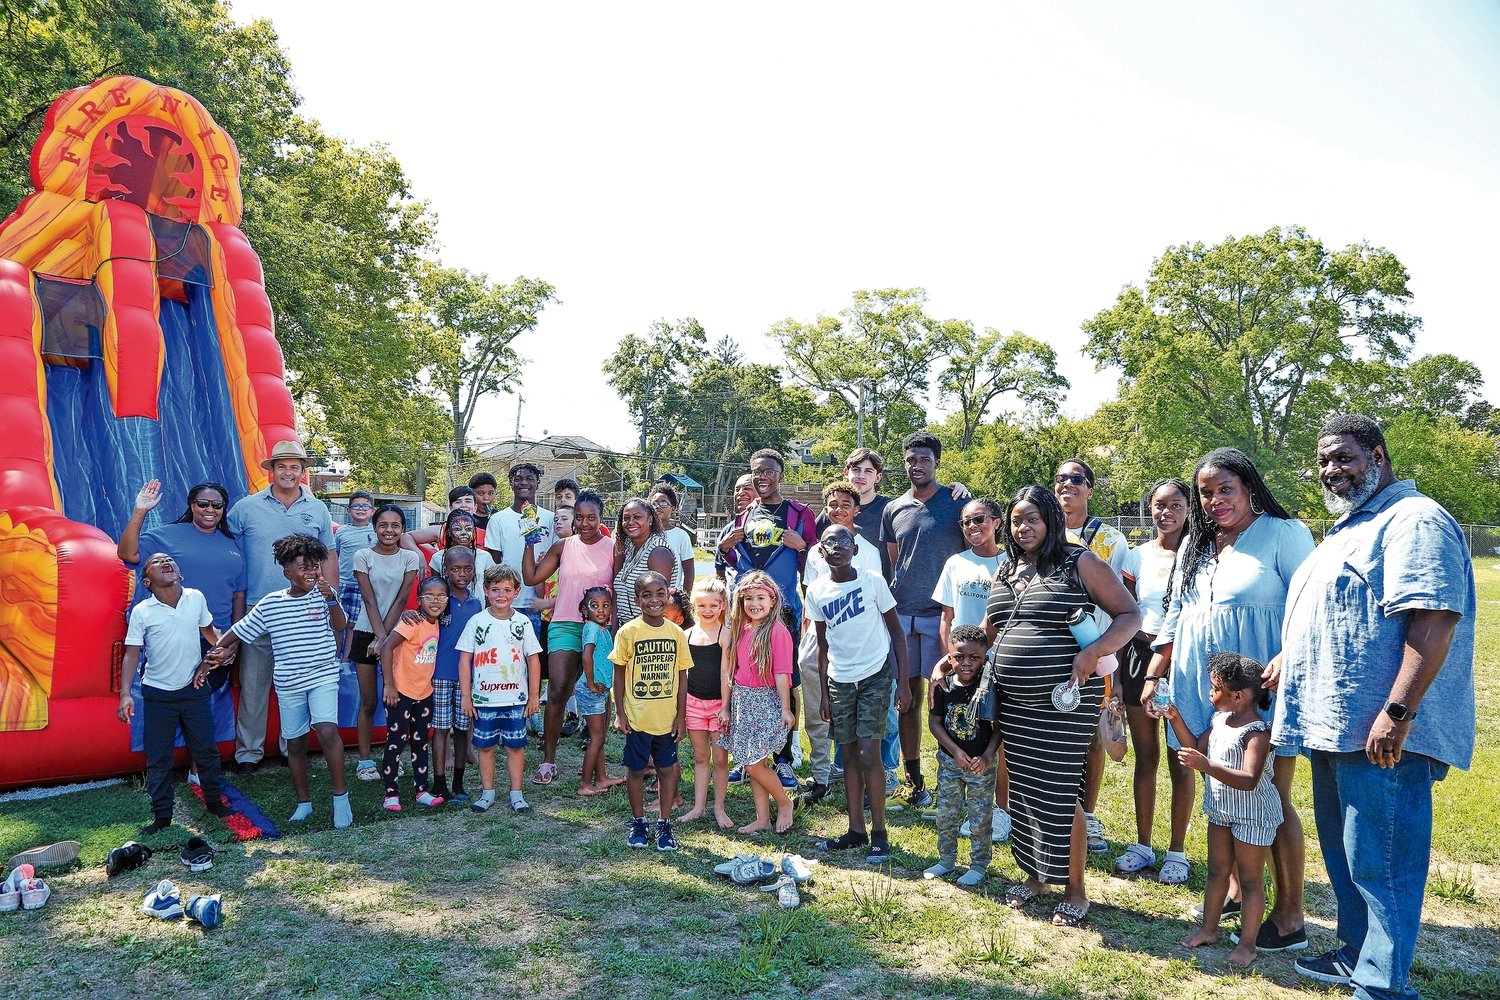 The inflatable slide attracted a large group of people at the Lawrence Woodmere Academy barbecue.